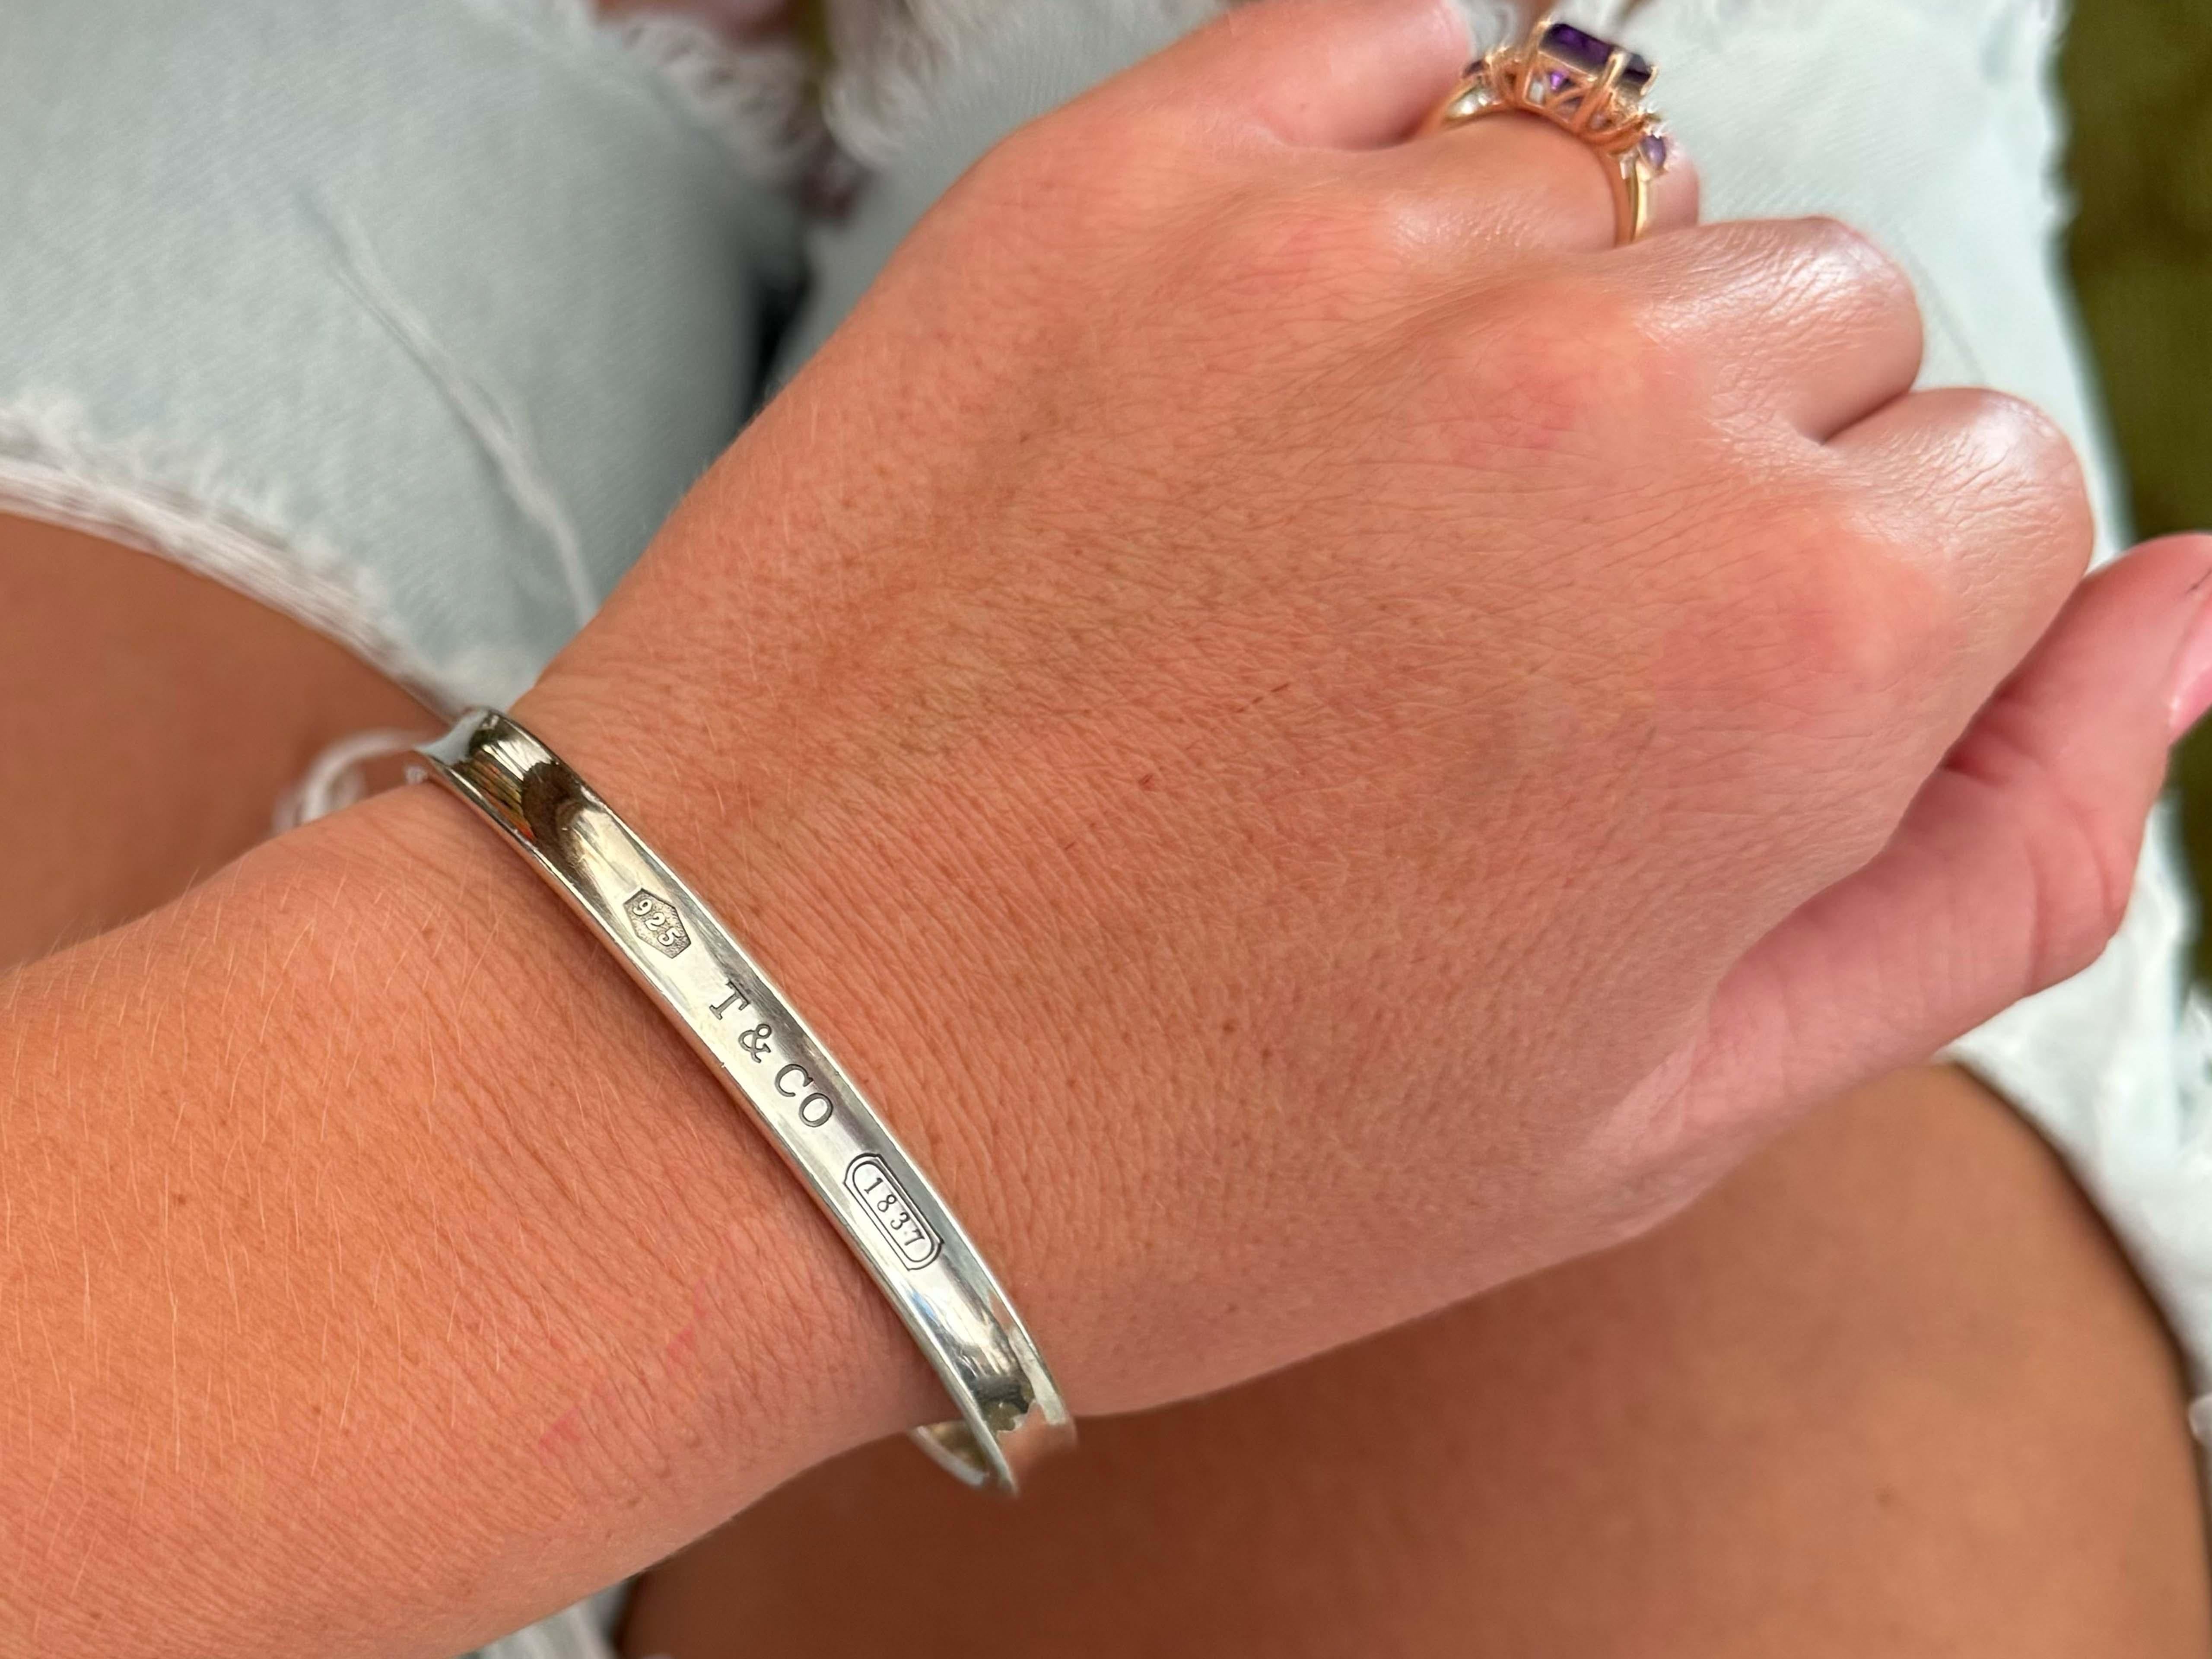 Item Specifications:

Brand: Tiffany & Co.

Metal: Sterling Silver

Metal Purity: AG 925 

Bangle Size: fits wrist up to size 7.5

Total Weight: 34.1 Grams

Condition: Vintage, Excellent

Stamped: 